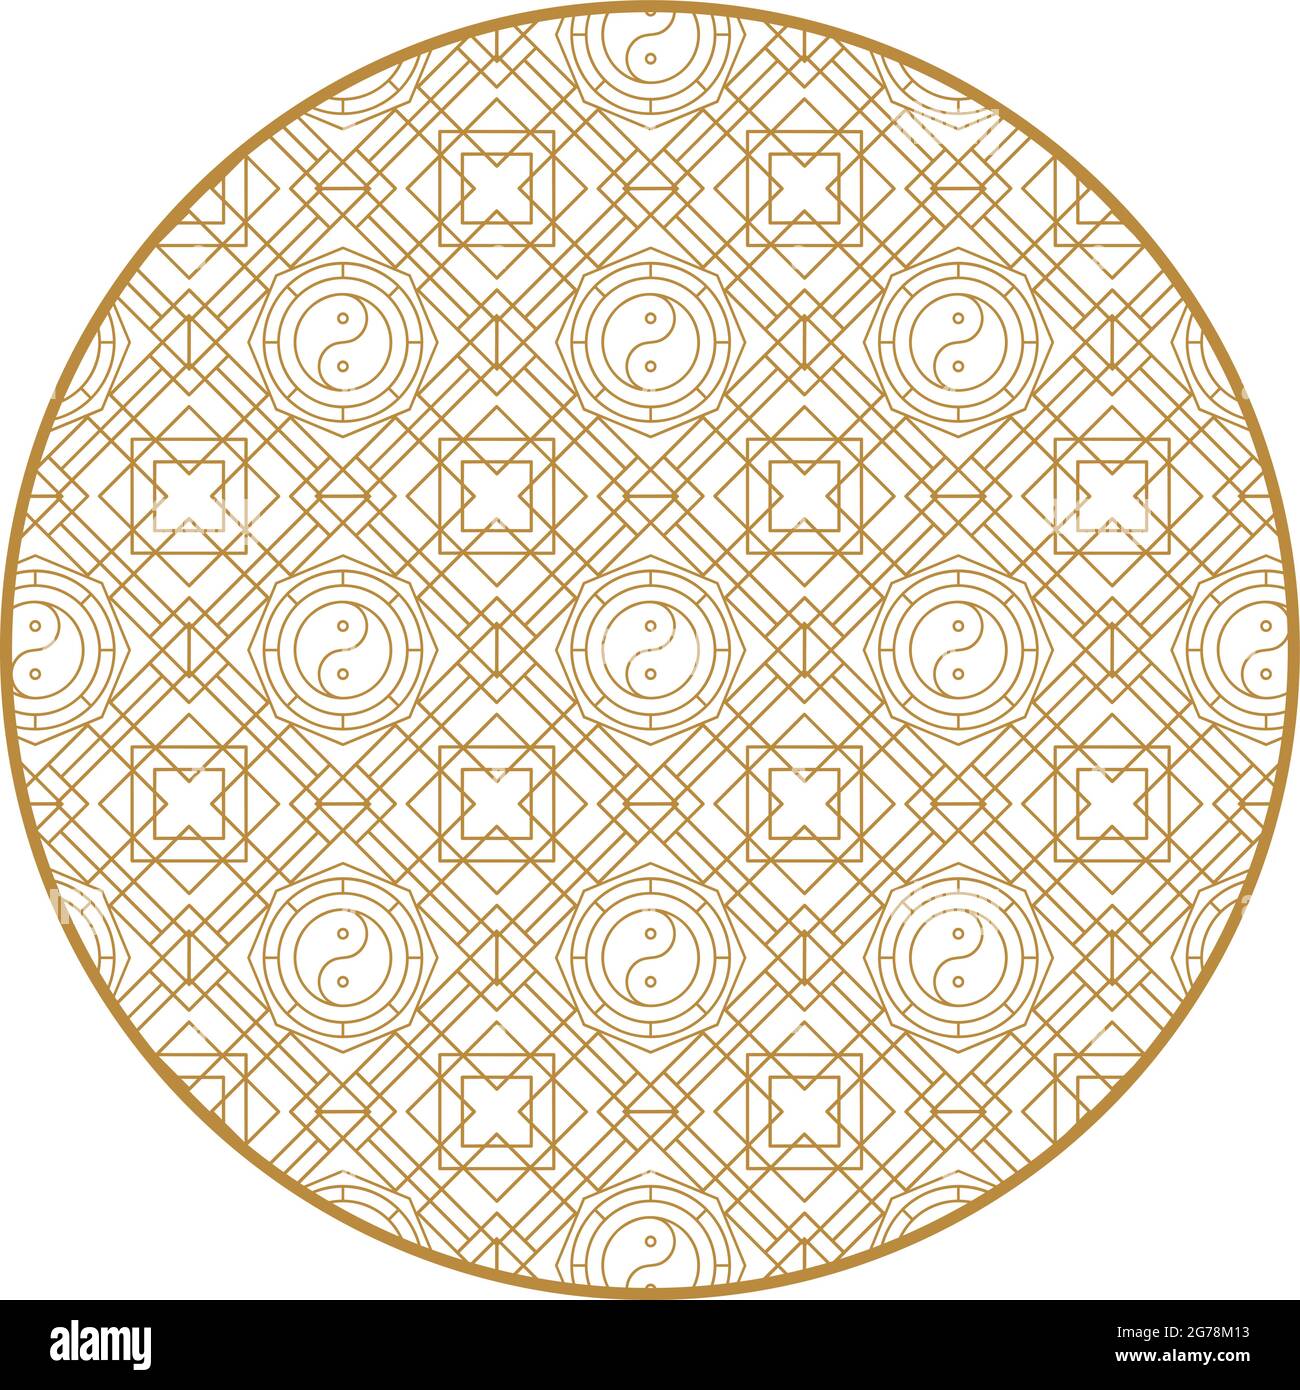 Chinese decoration elements. Frame, border or tiles with patterns. Stock Vector